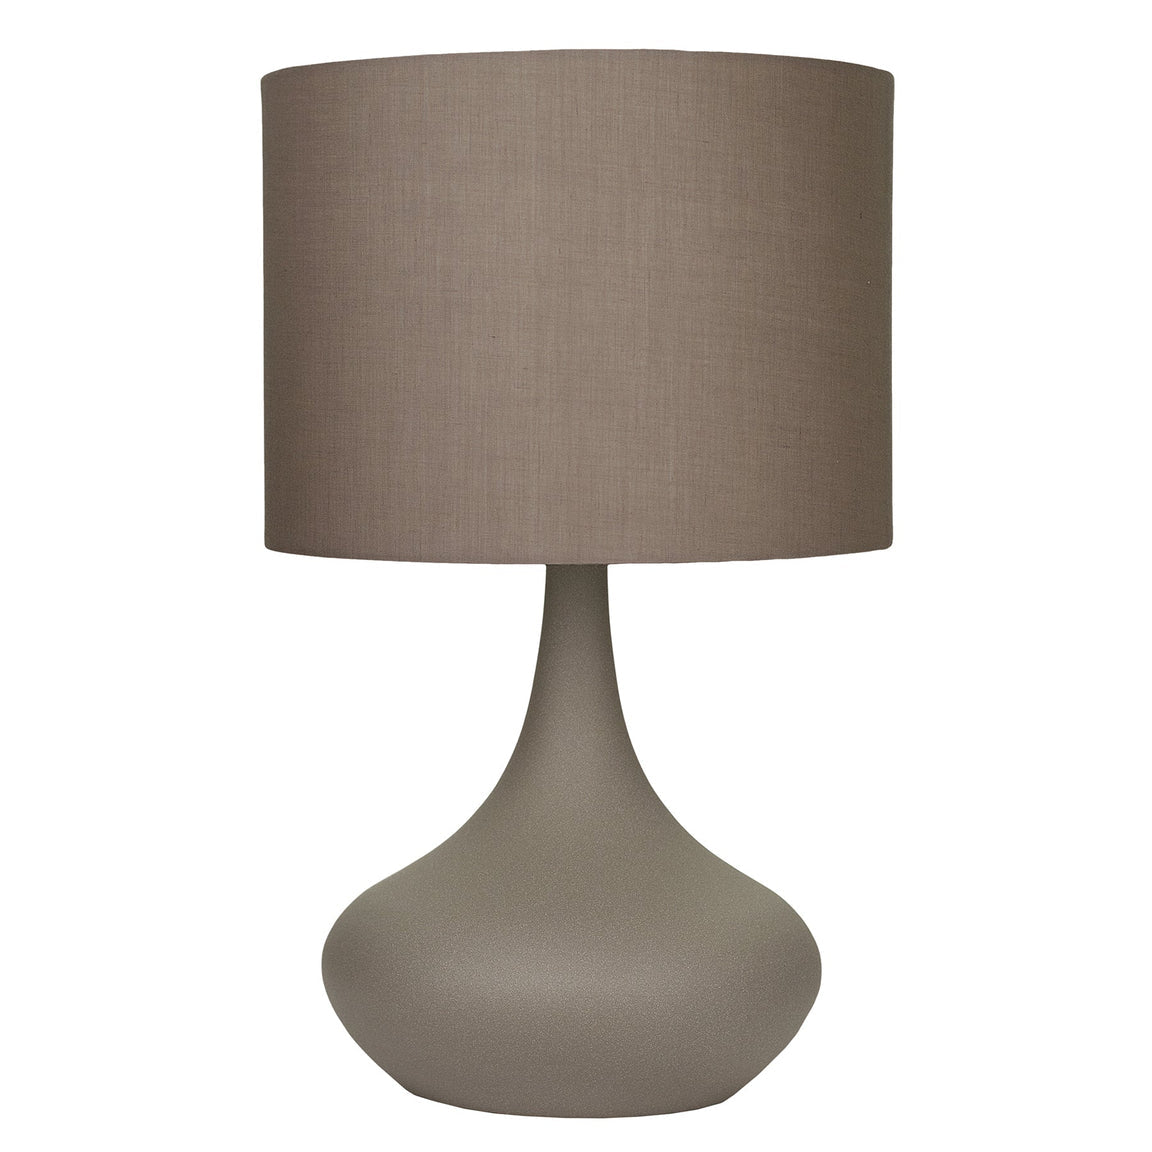 Atley Small Concrete-Look Modern Touch Lamp